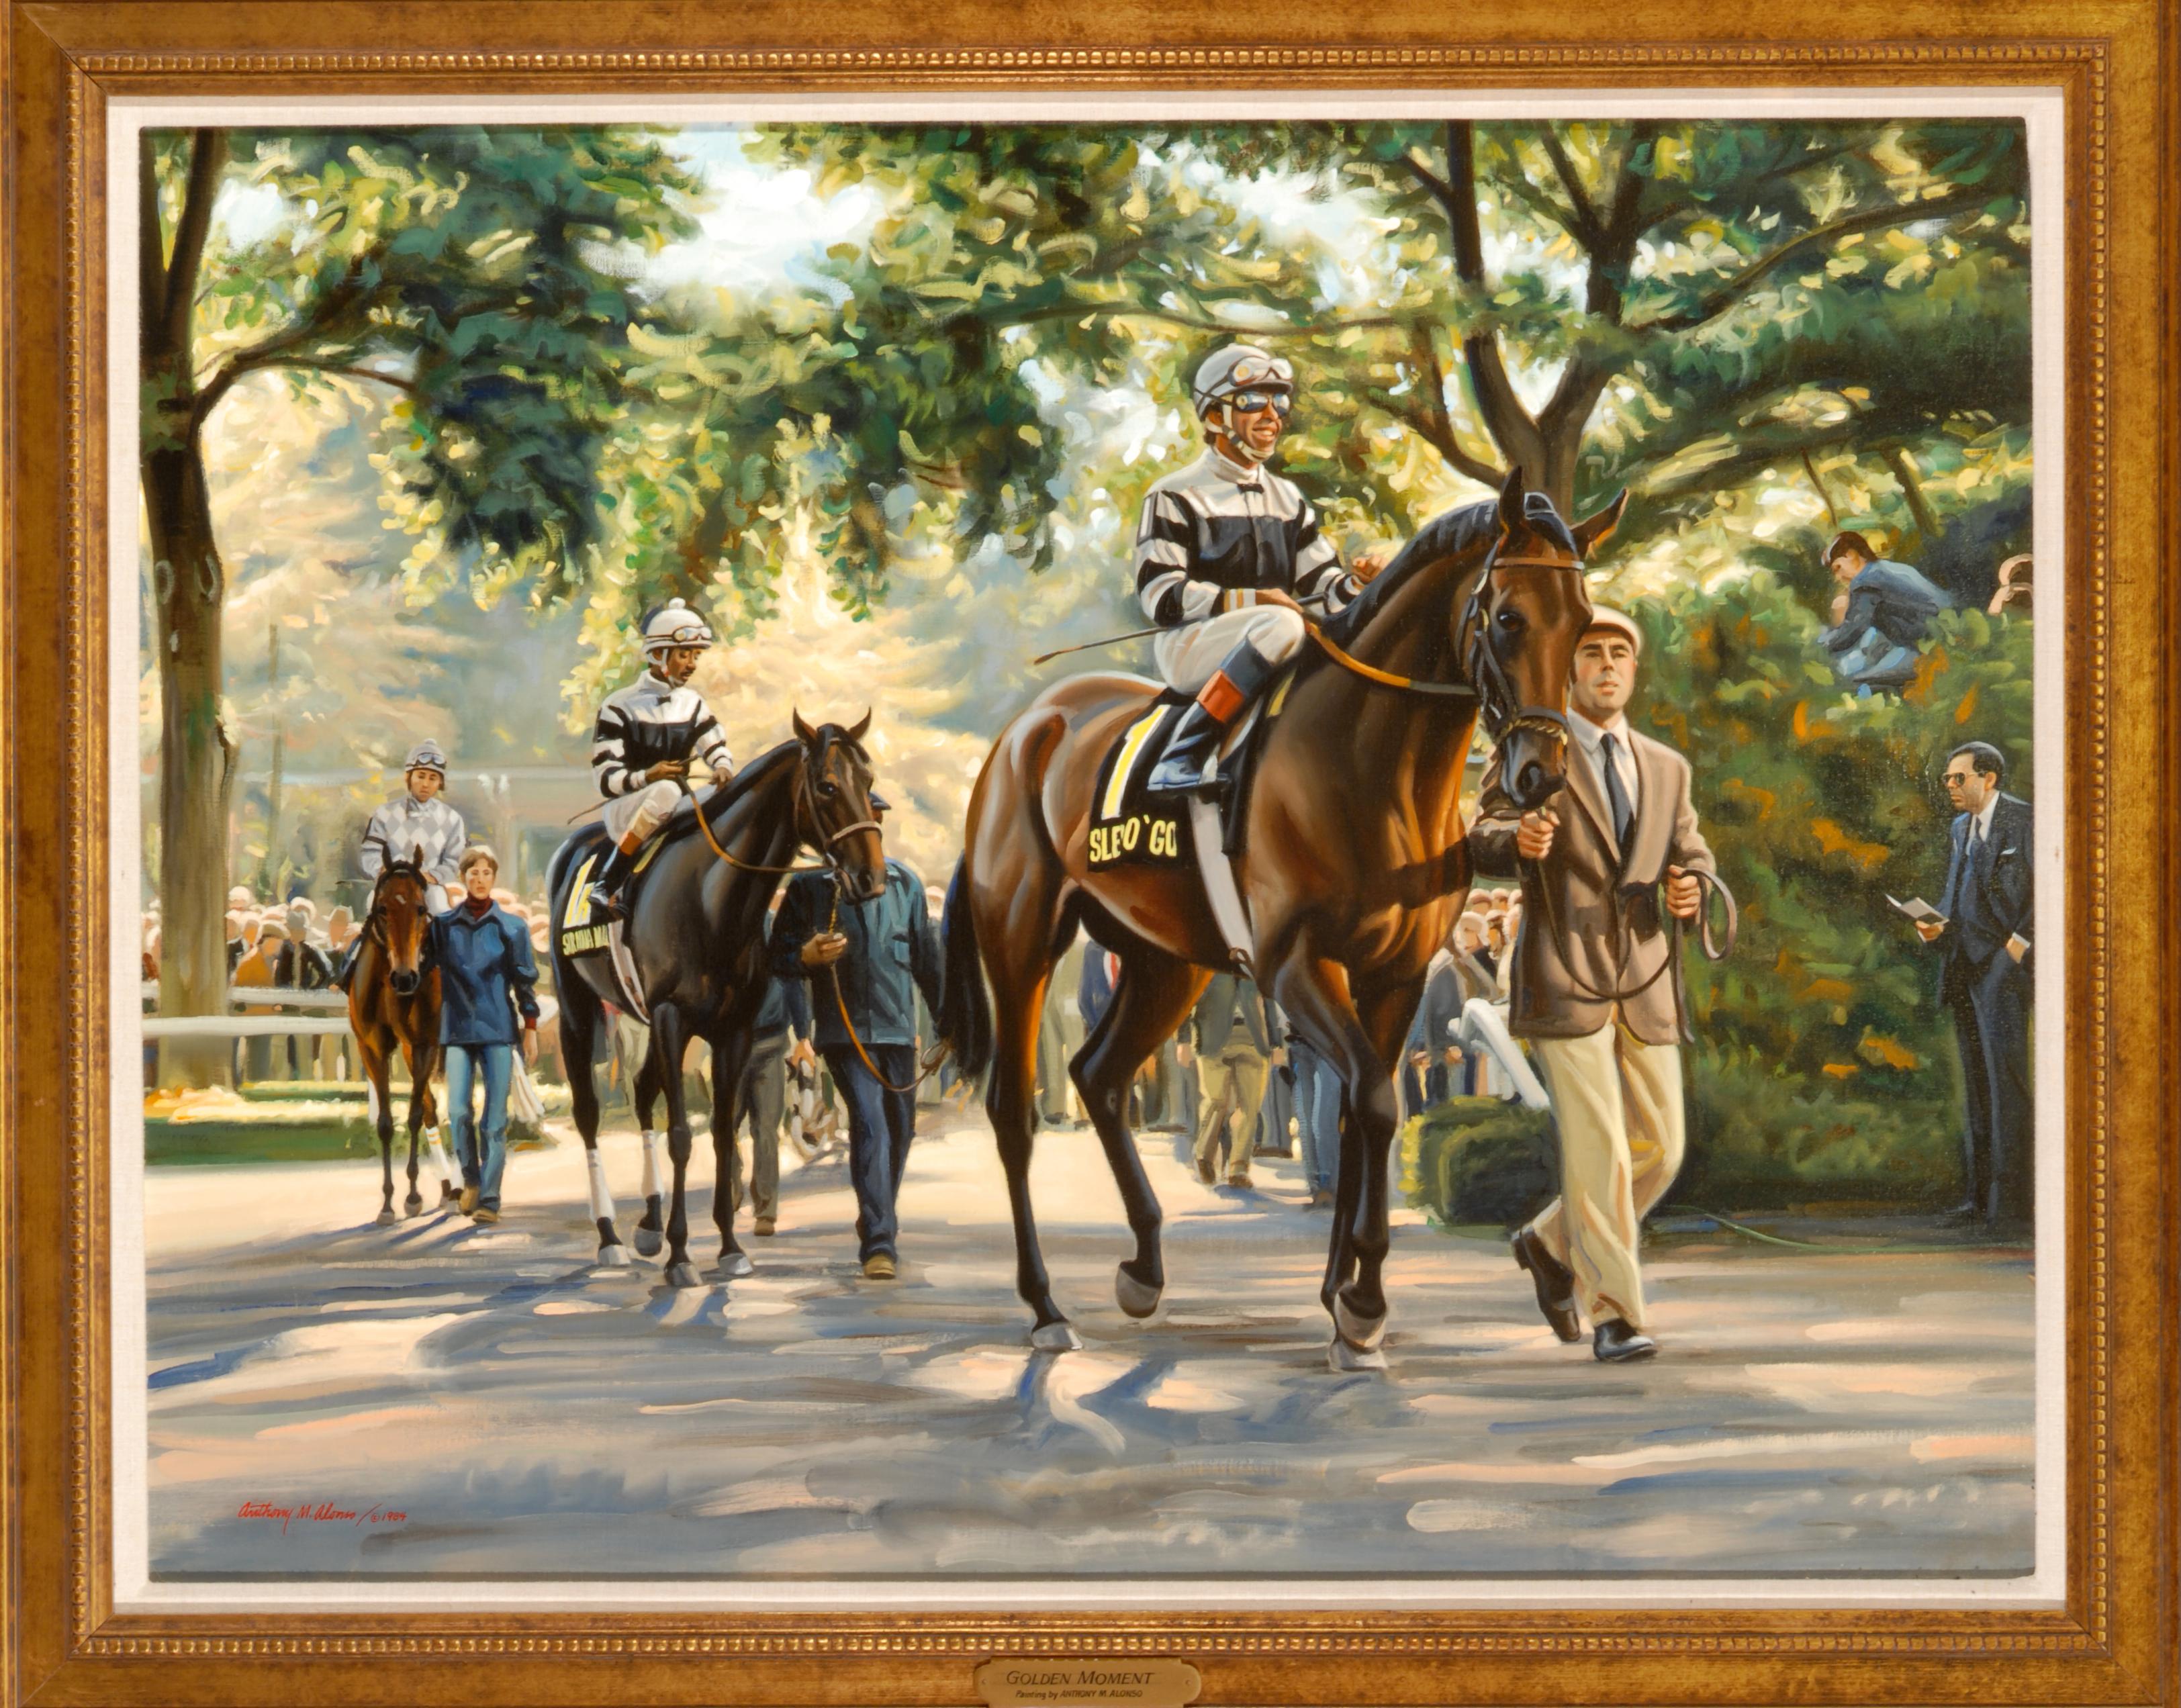 Anthony M. Alonso Figurative Painting - Golden Horserace moment,  "Slew O'Gold"